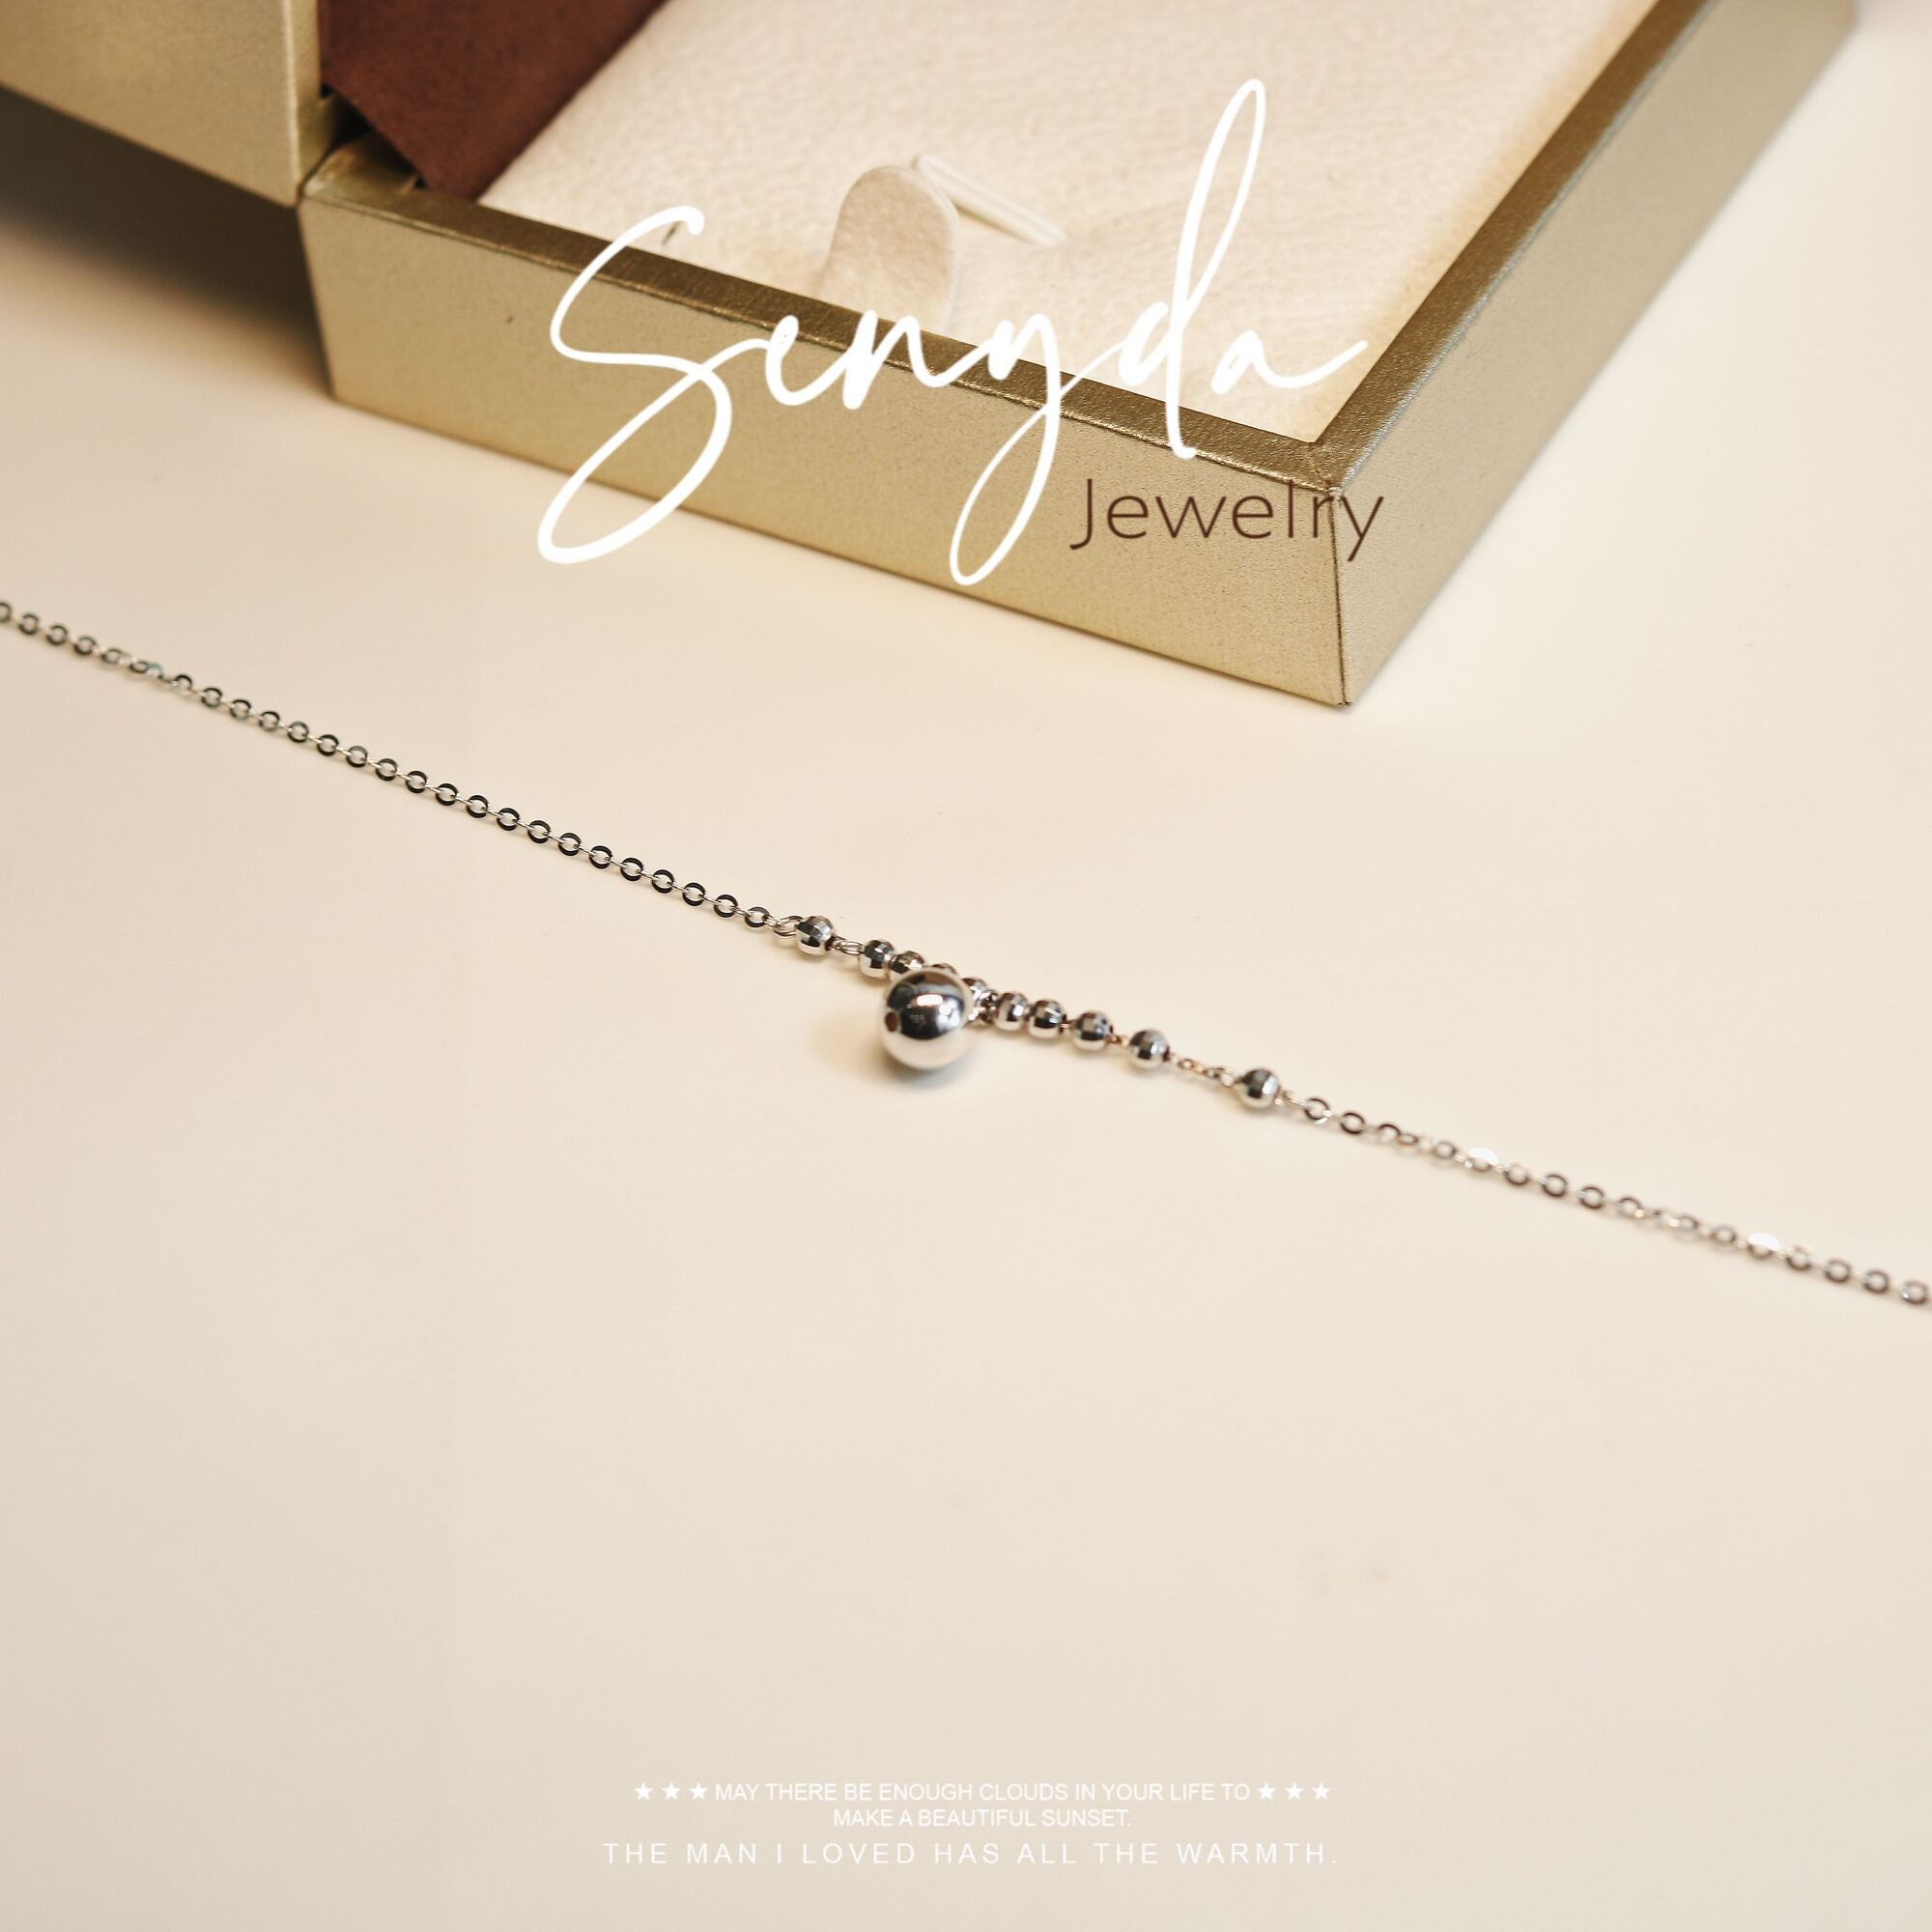 An anklet with a smooth bead design hangs from it